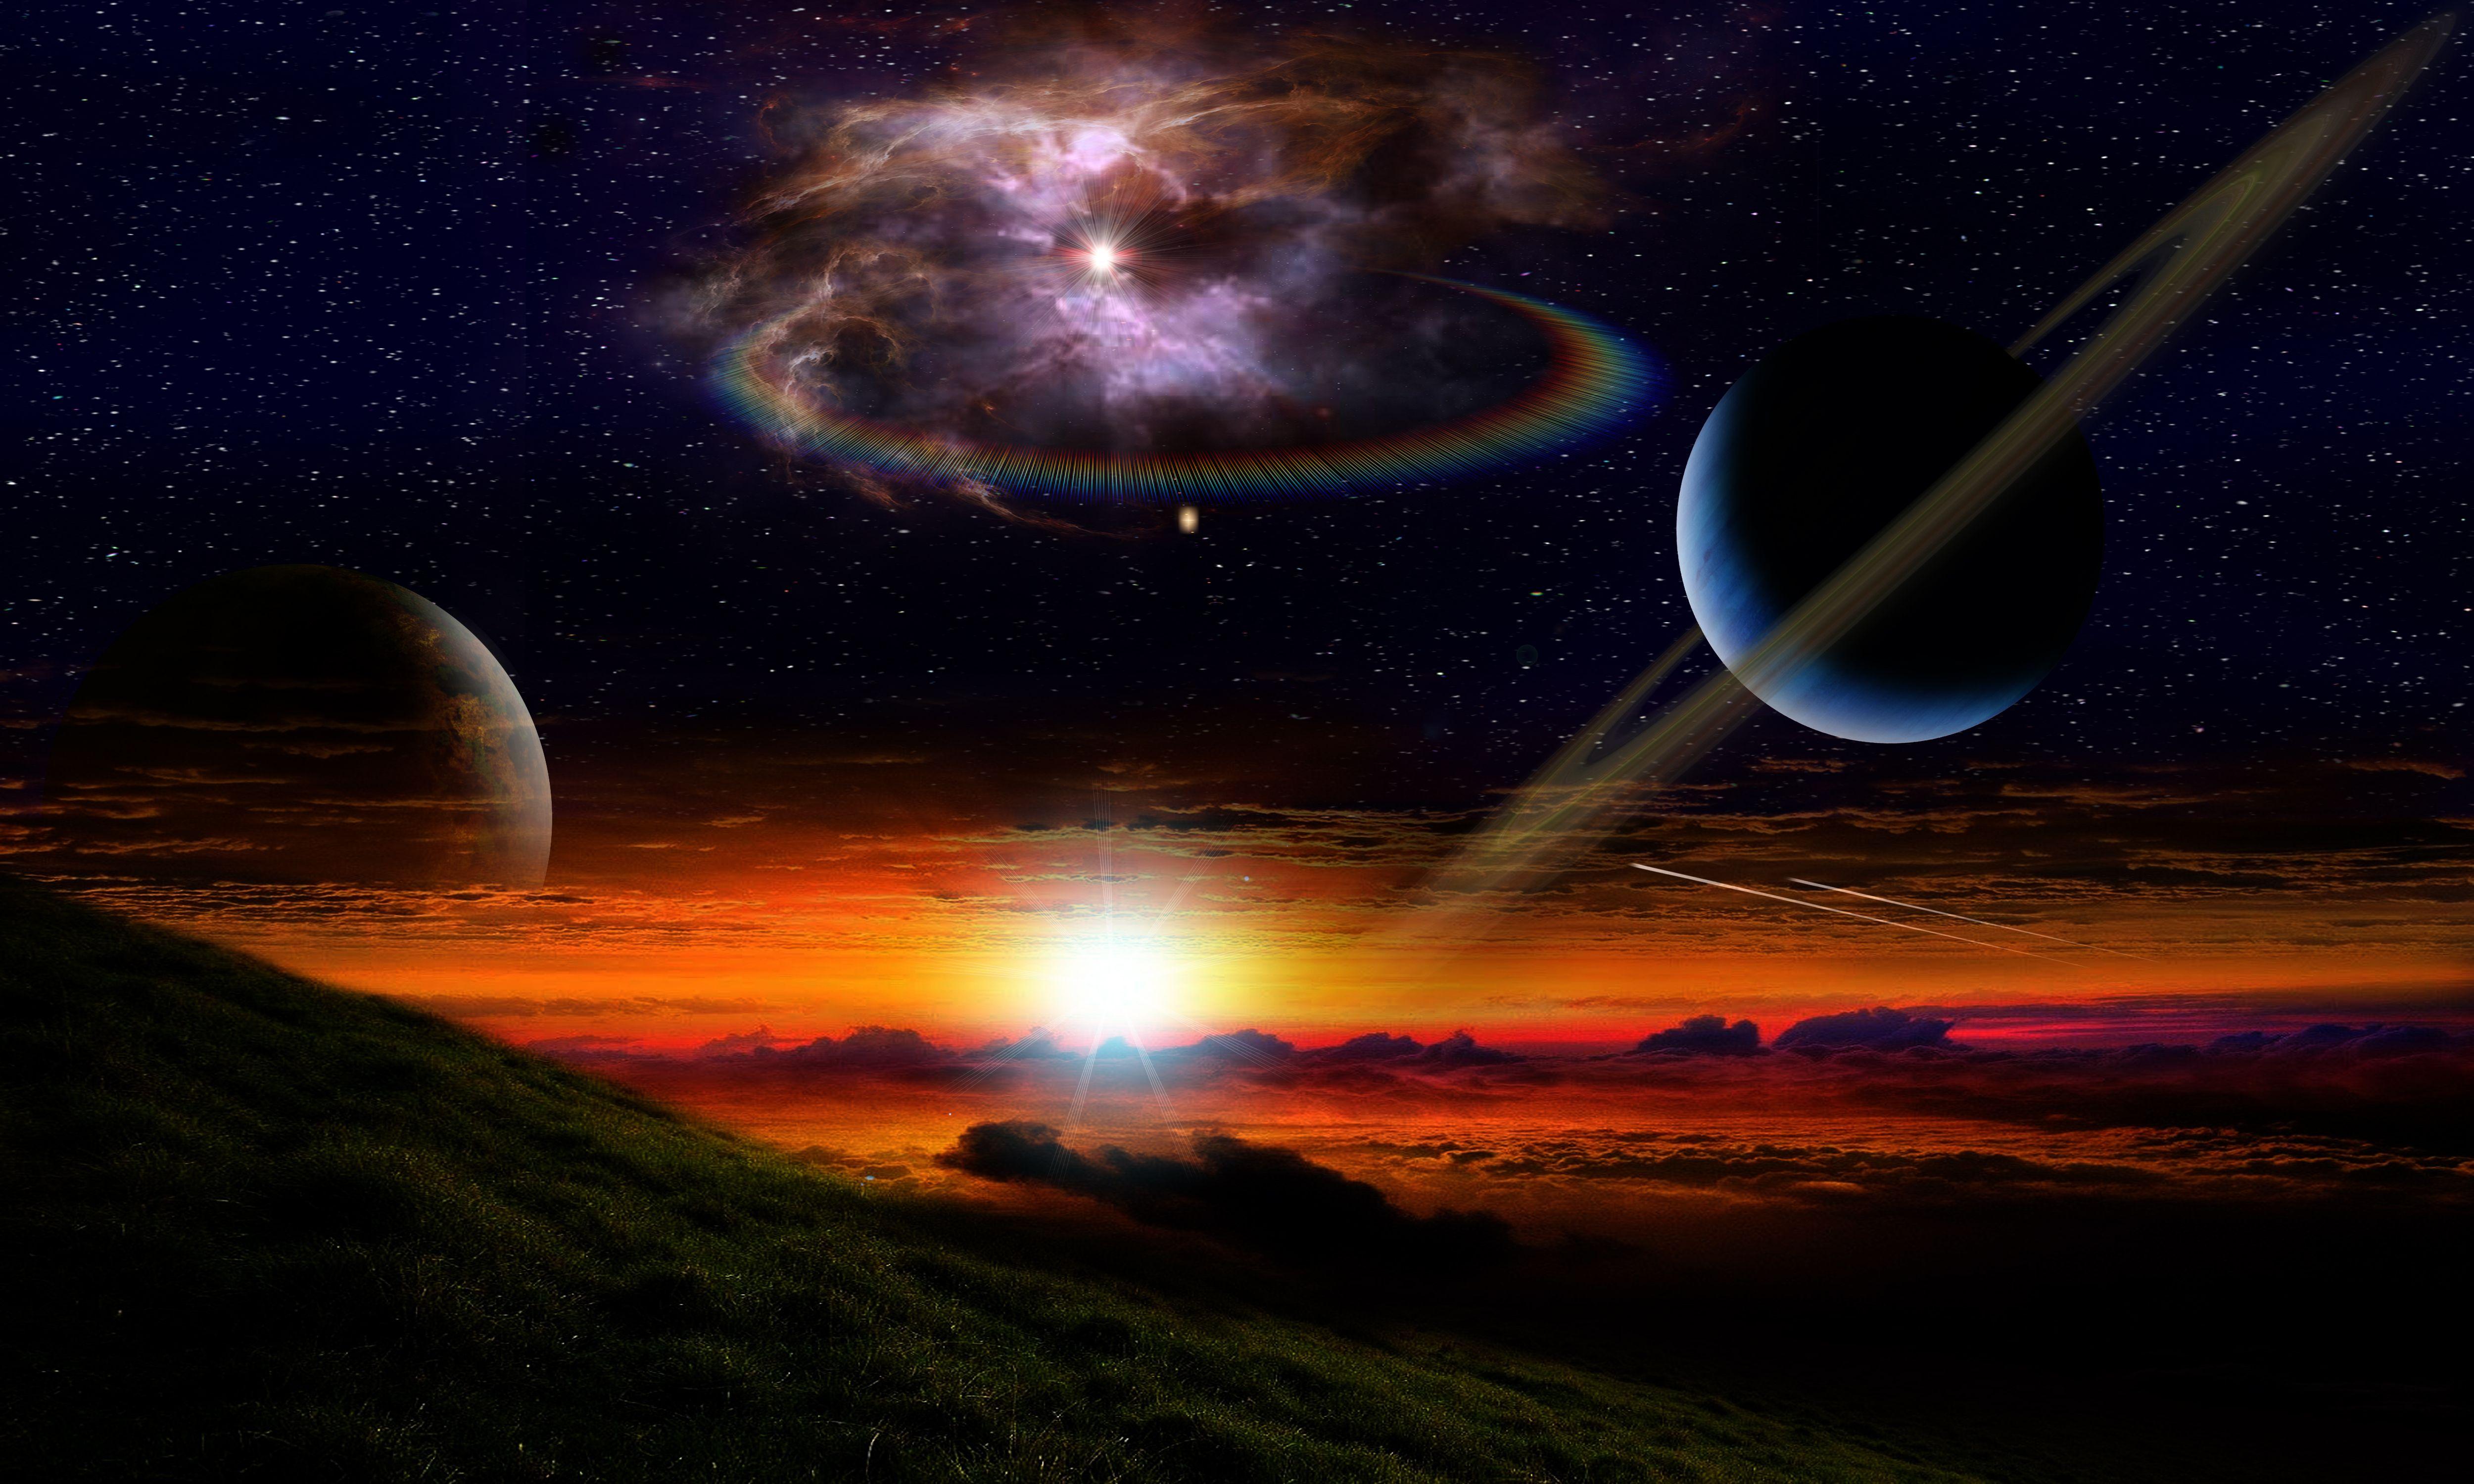 Stars And Planets Wallpapers Top Free Stars And Planets Backgrounds Wallpaperaccess 0115